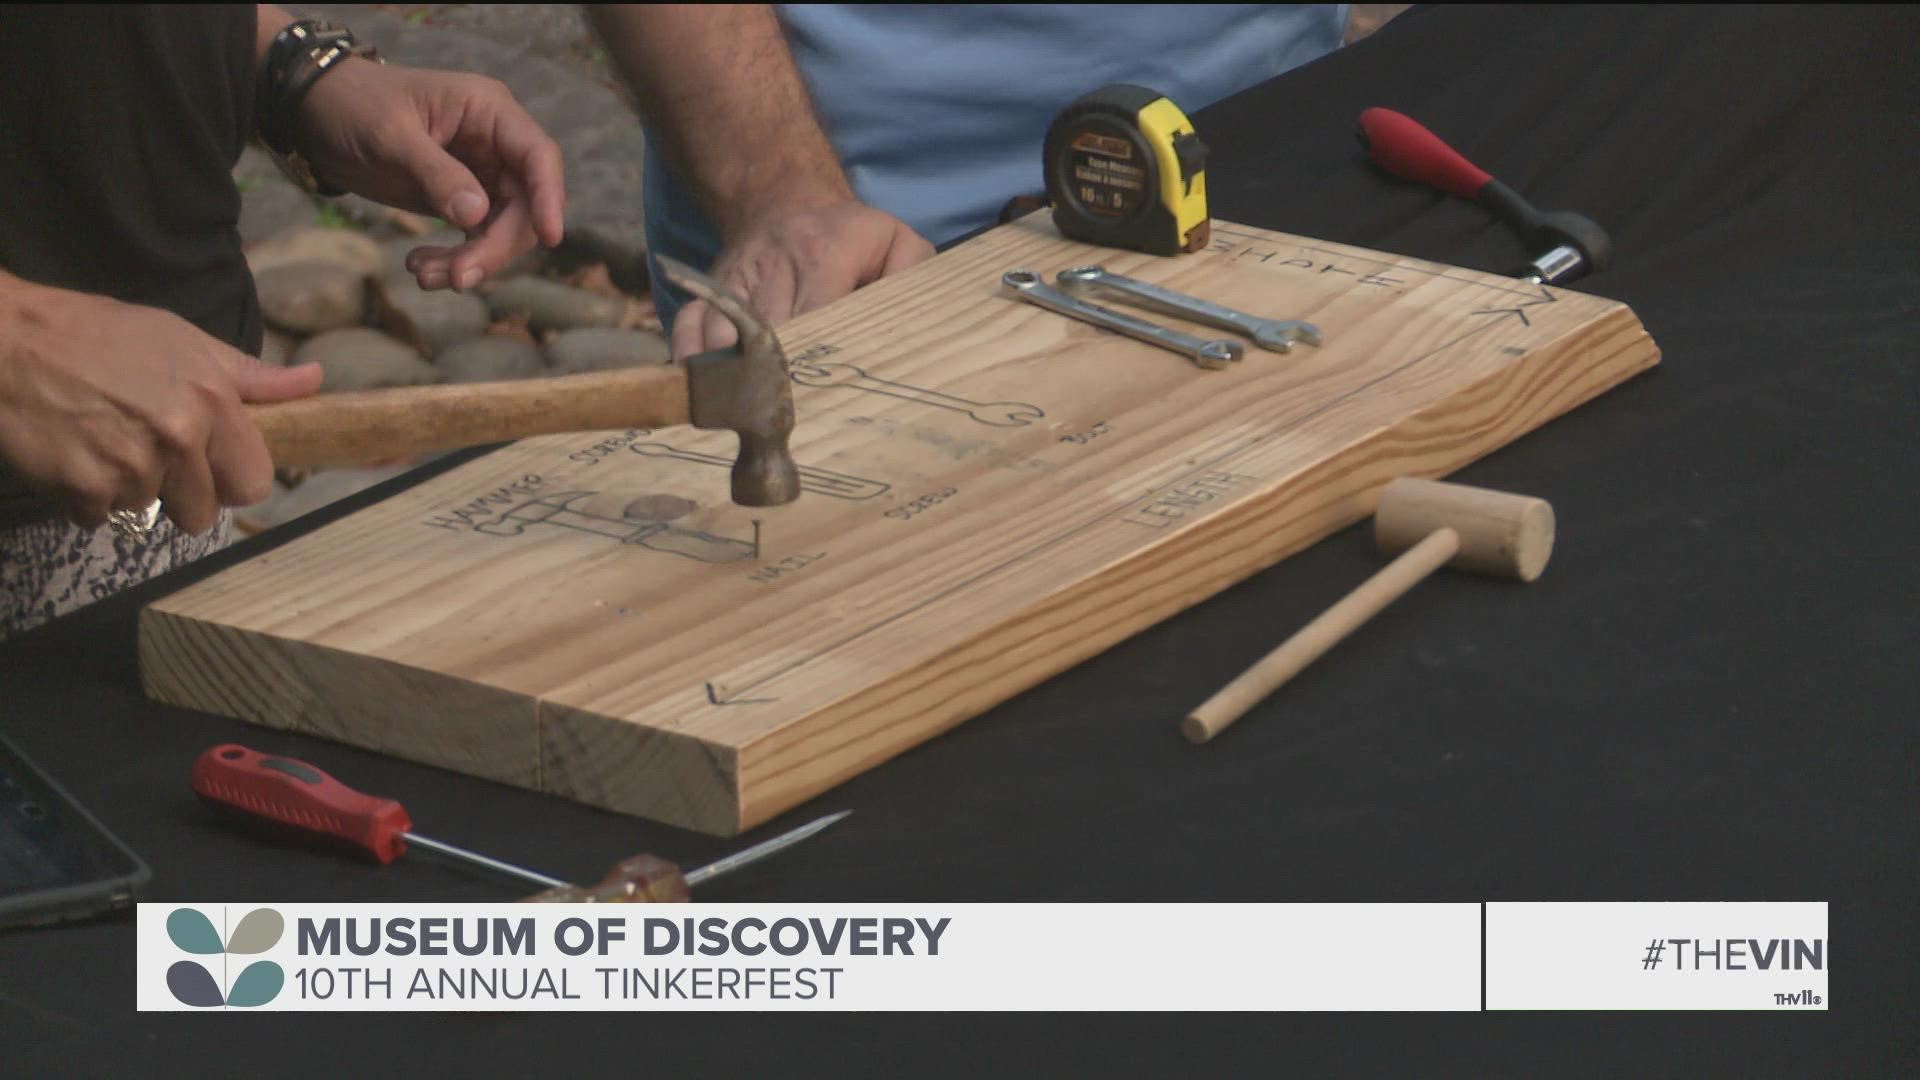 The Museum of Discovery is up and running once again, and they have a really fun event coming up this weekend!